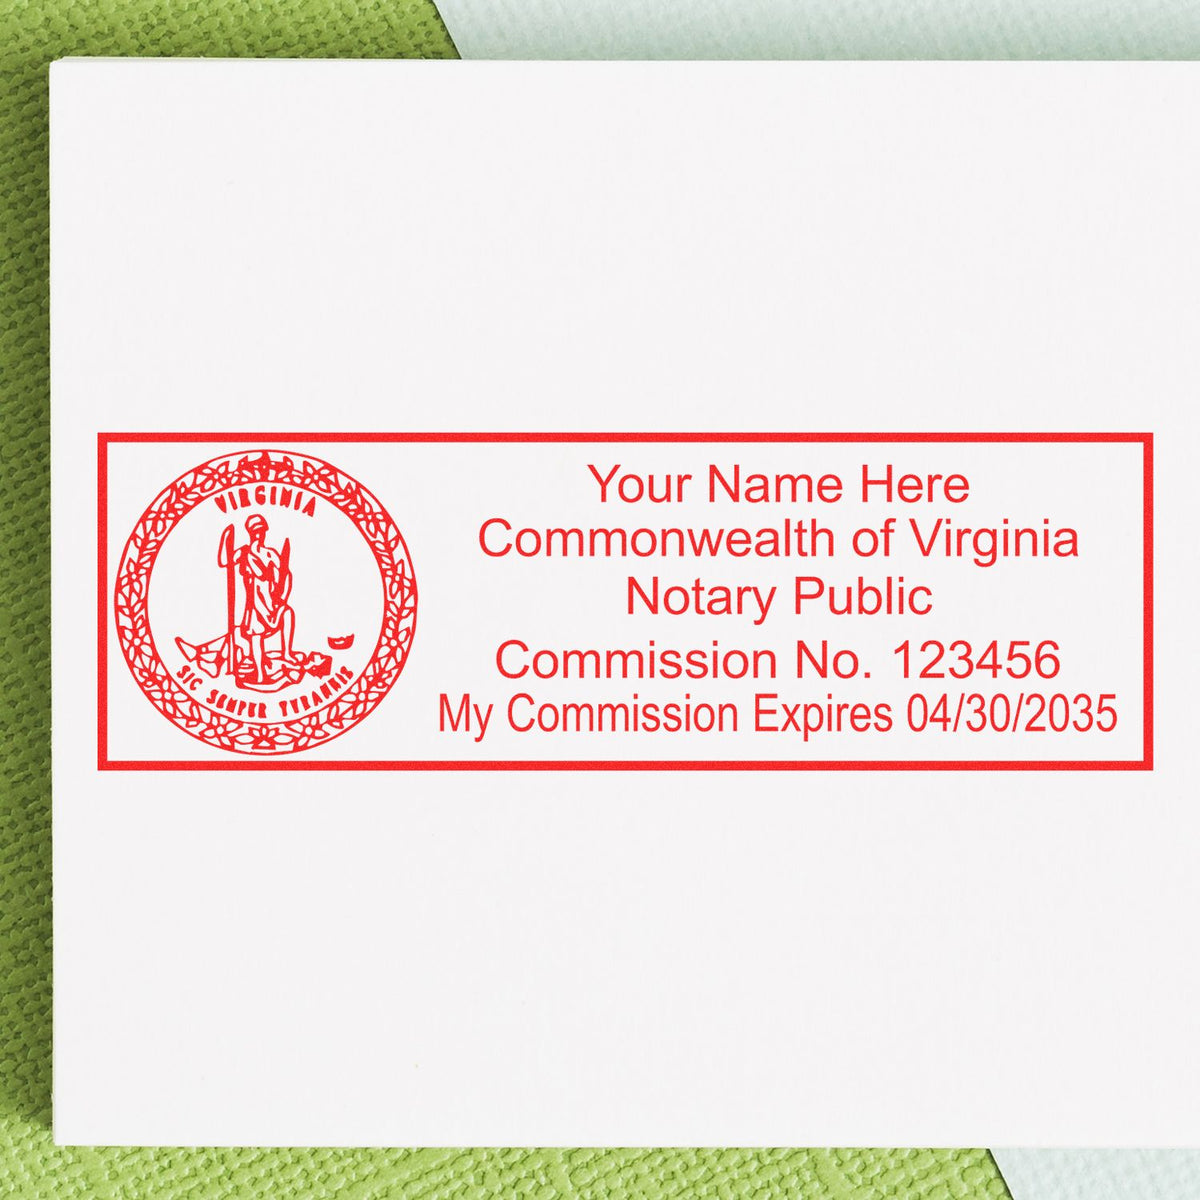 The Heavy-Duty Virginia Rectangular Notary Stamp stamp impression comes to life with a crisp, detailed photo on paper - showcasing true professional quality.